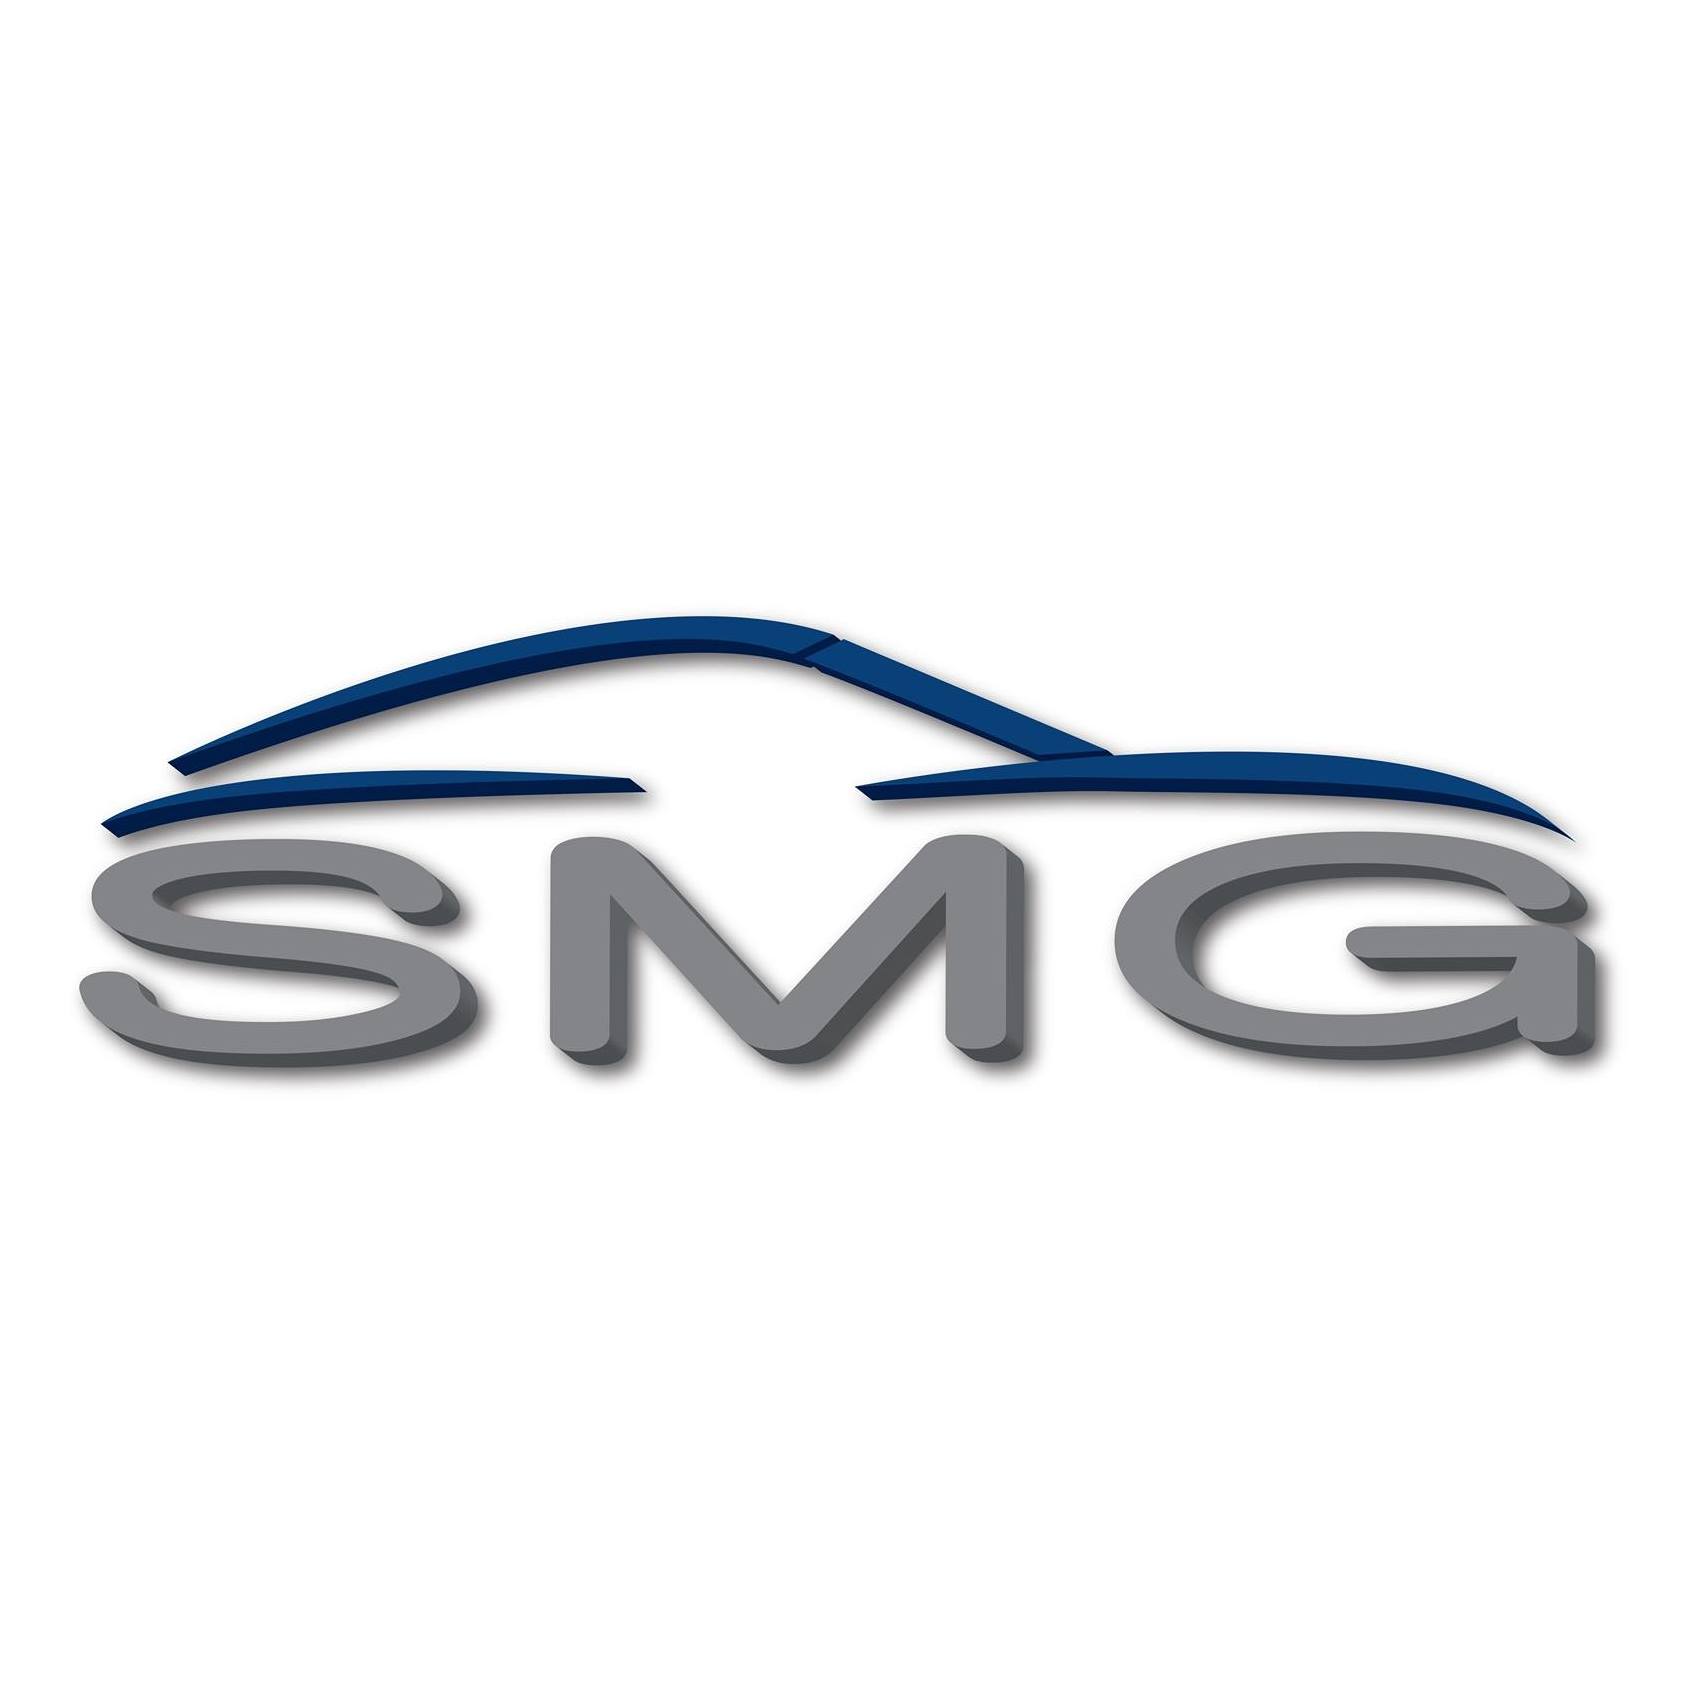 SMG Engineering Automotive Co